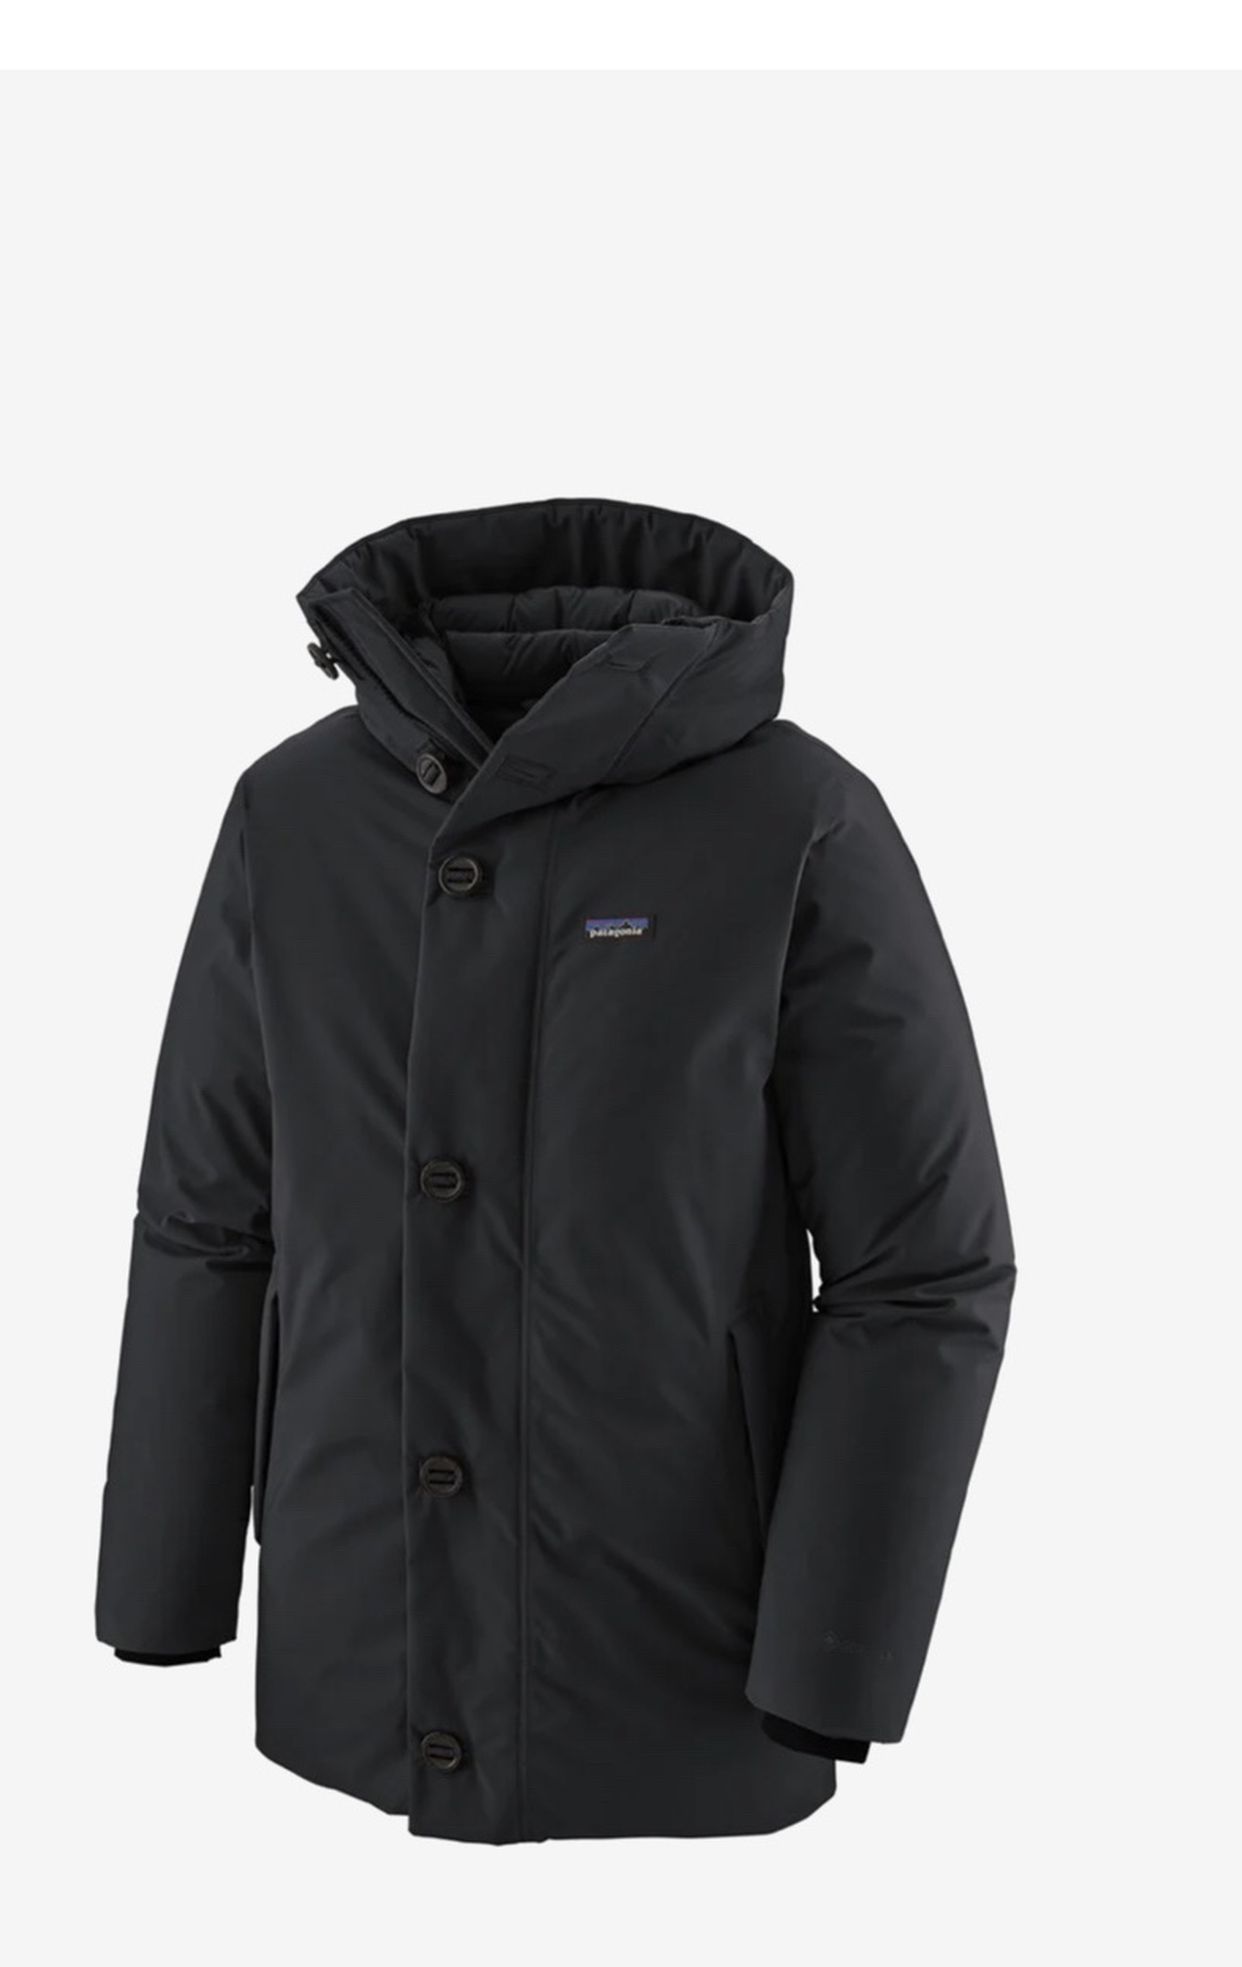 Brand New Never Worn Still With Tags Patagonia frozen range Parka Size XXL $400